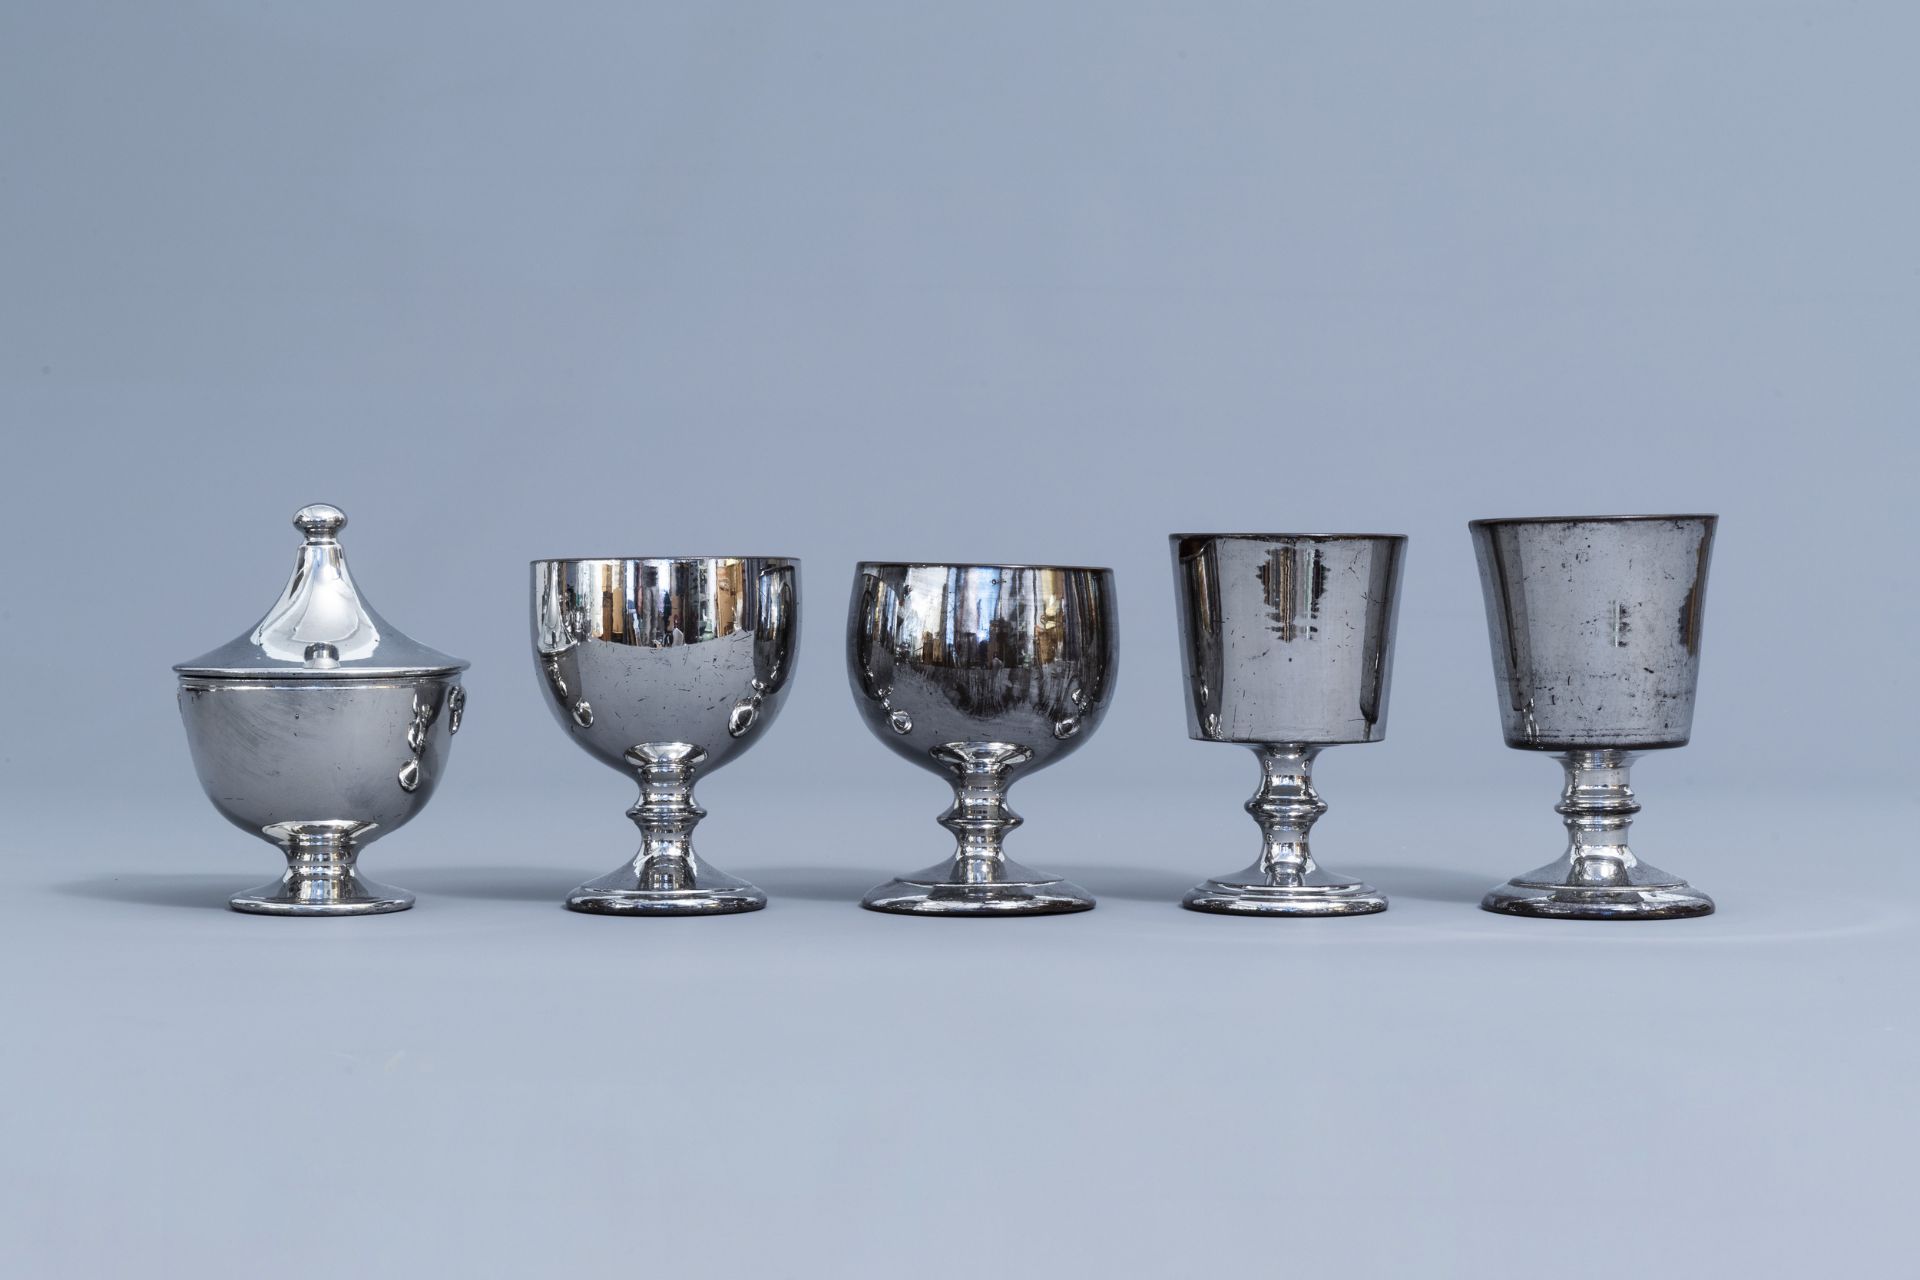 A varied collection of English silver lustreware items, 19th C. - Image 48 of 54